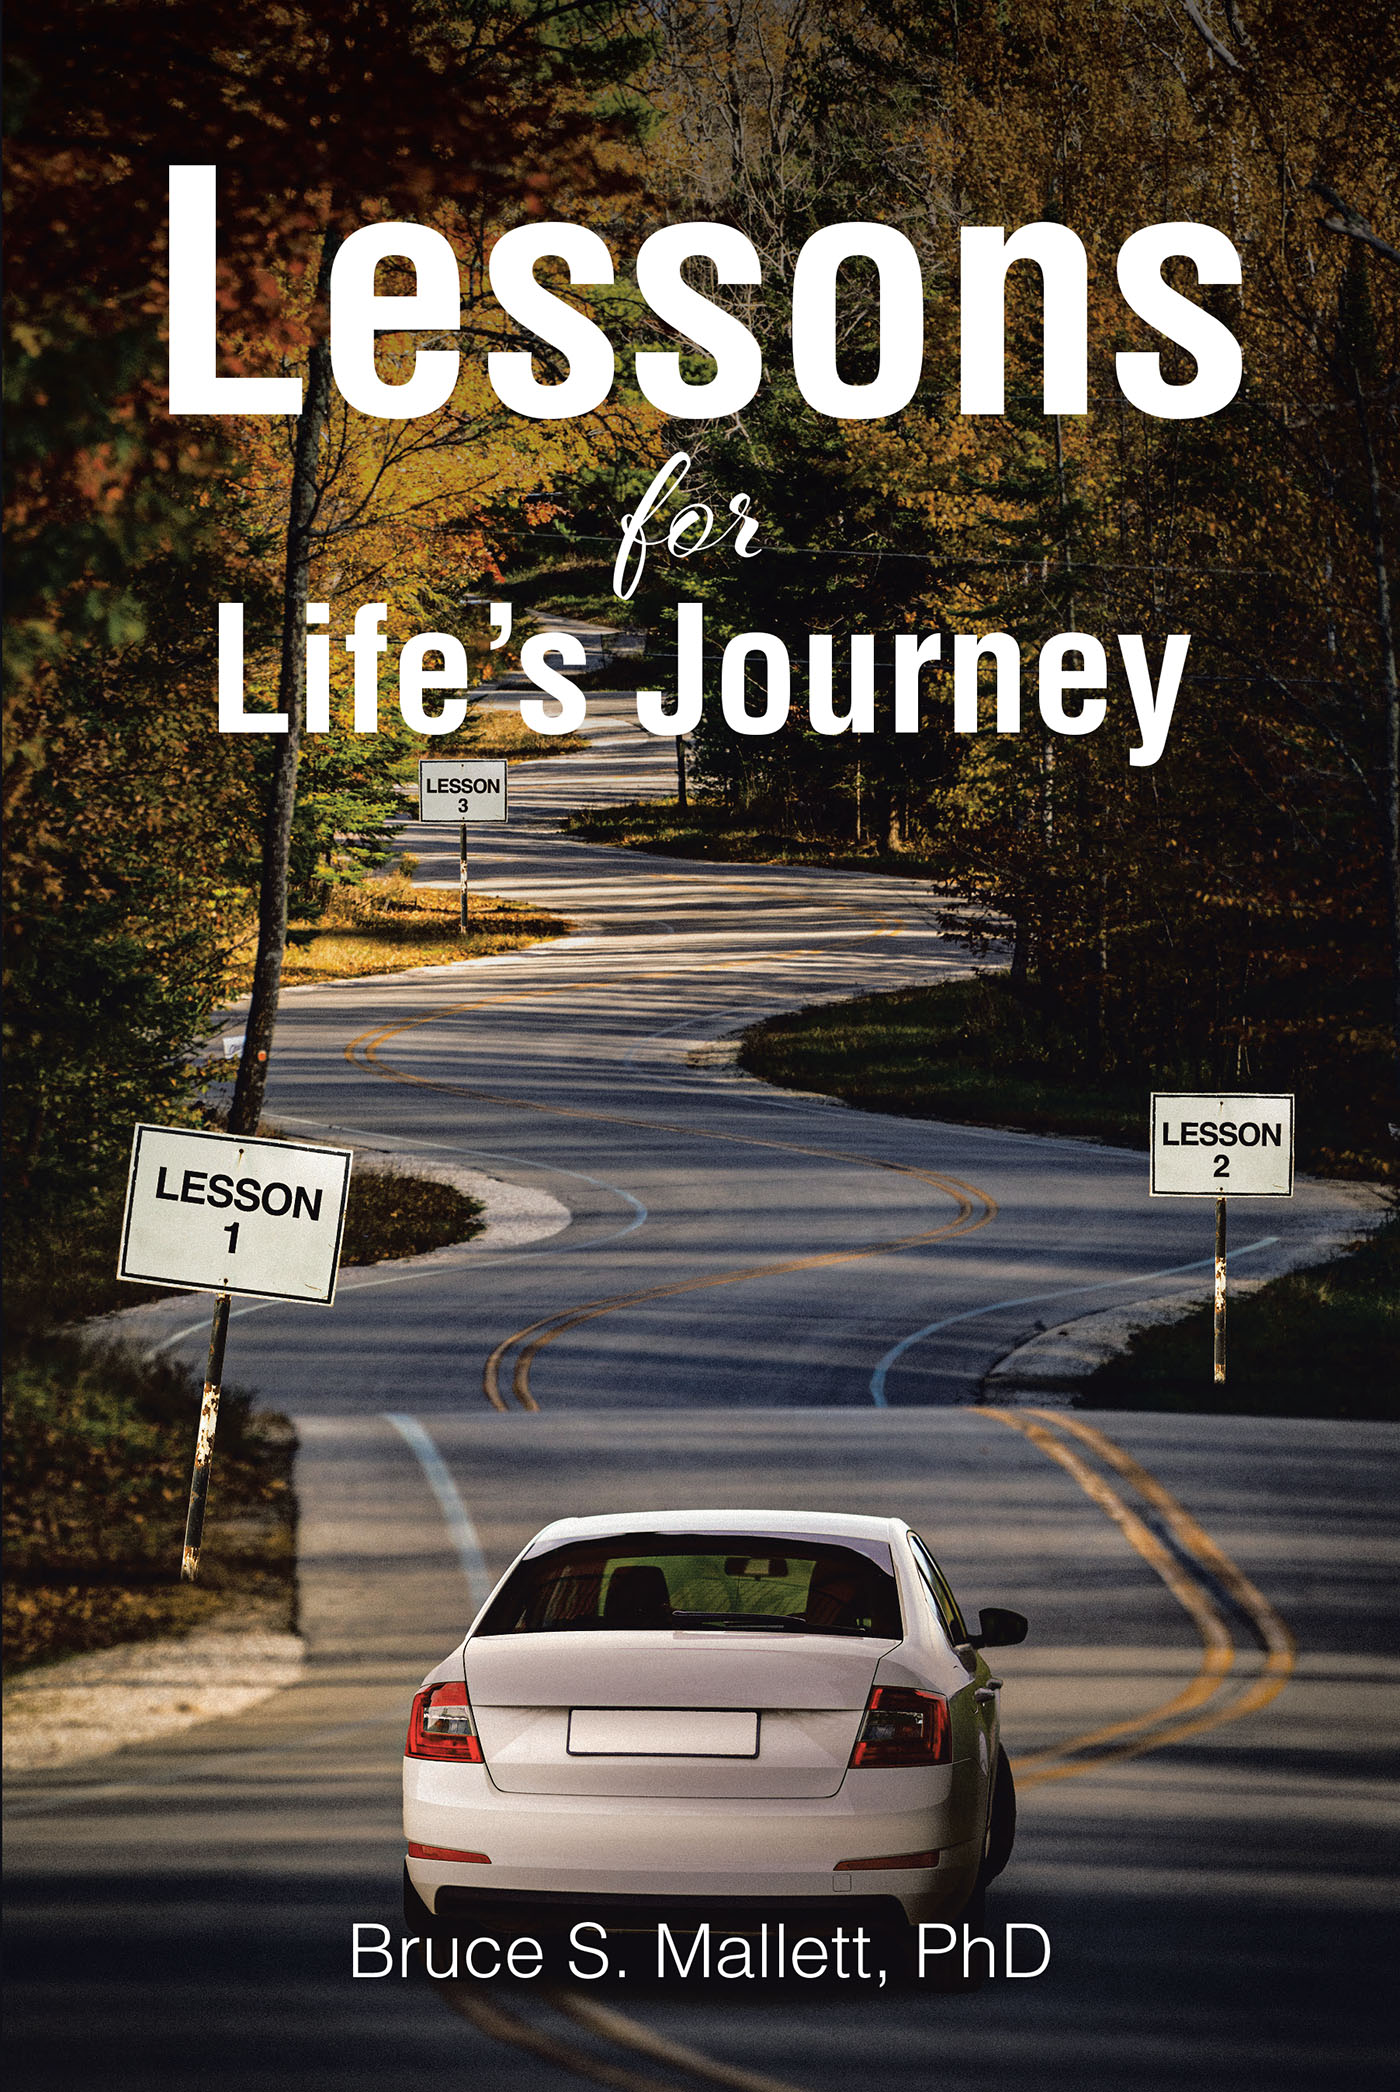 Bruce S. Mallett, PhD’s Newly Released “Lessons for Life’s Journey” Provides Insightful Guidance for Anyone in the Role of Nurturing Others to Reach Their Potential